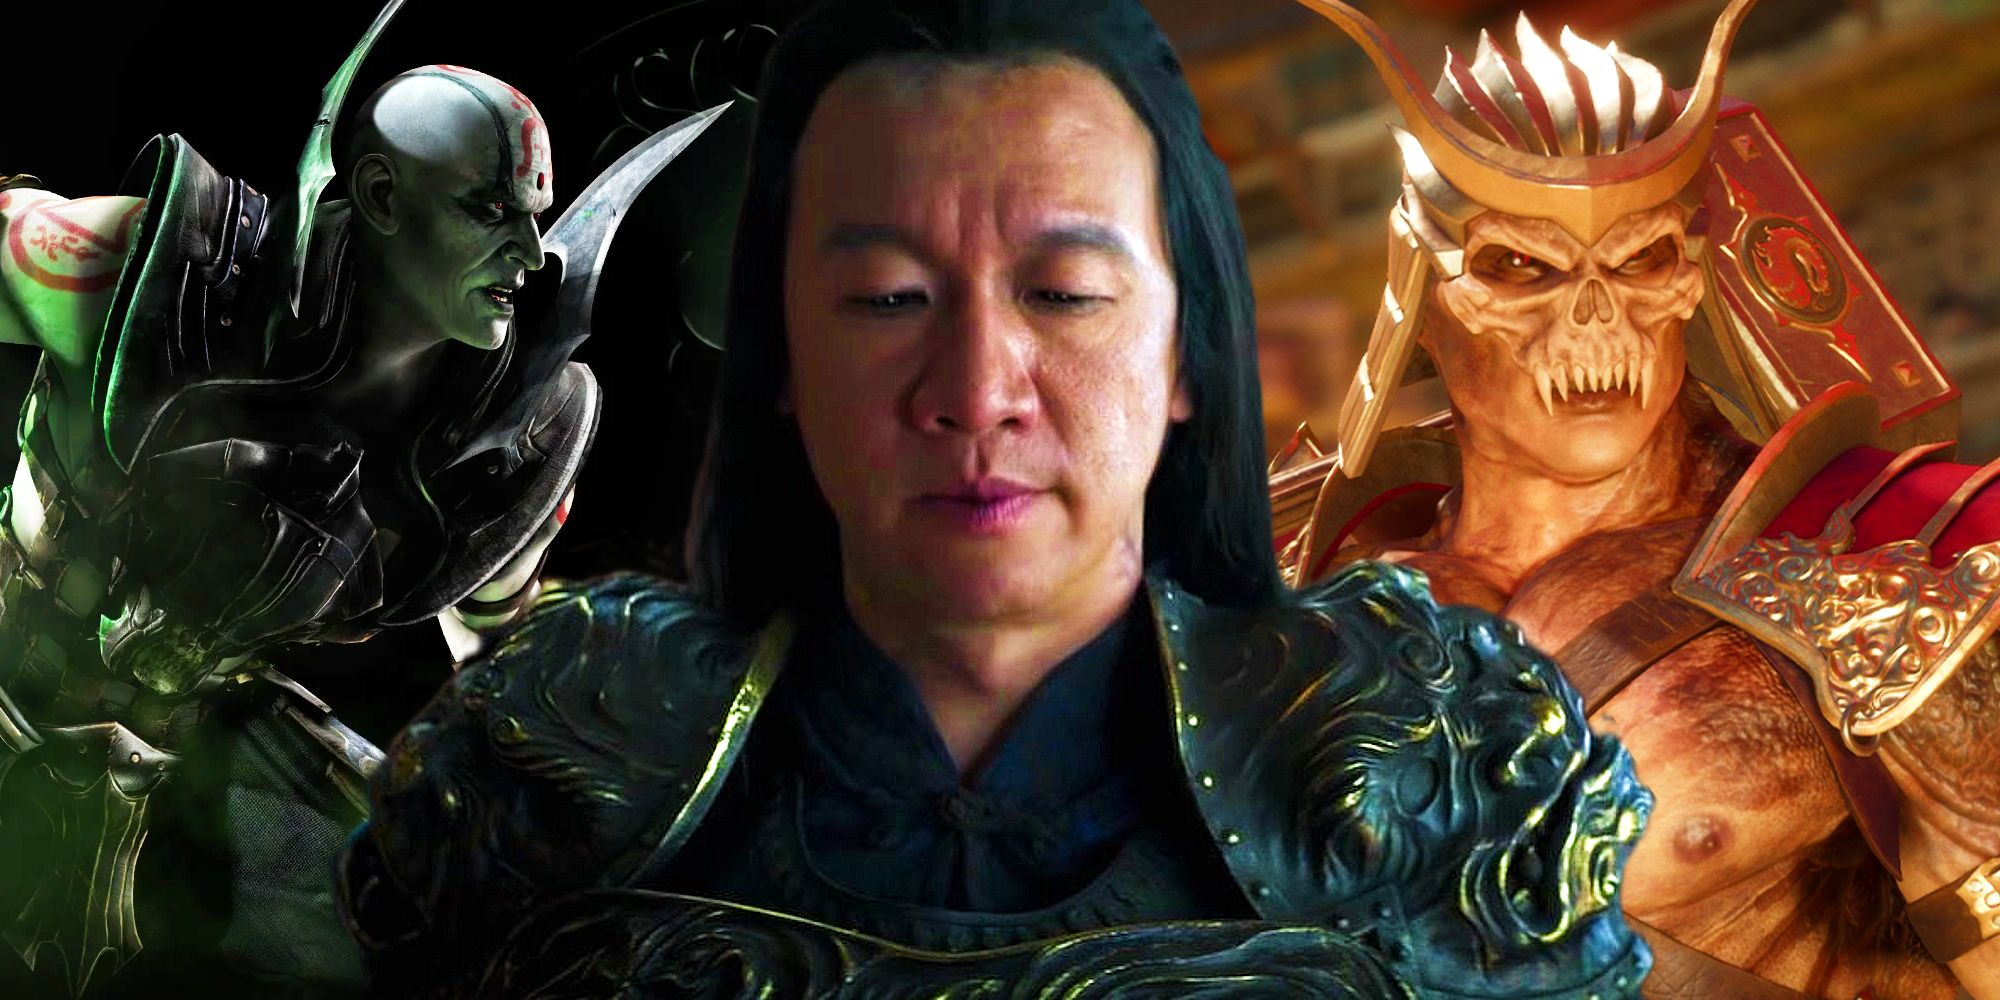 What to Expect from the Mortal Kombat Movie Sequel